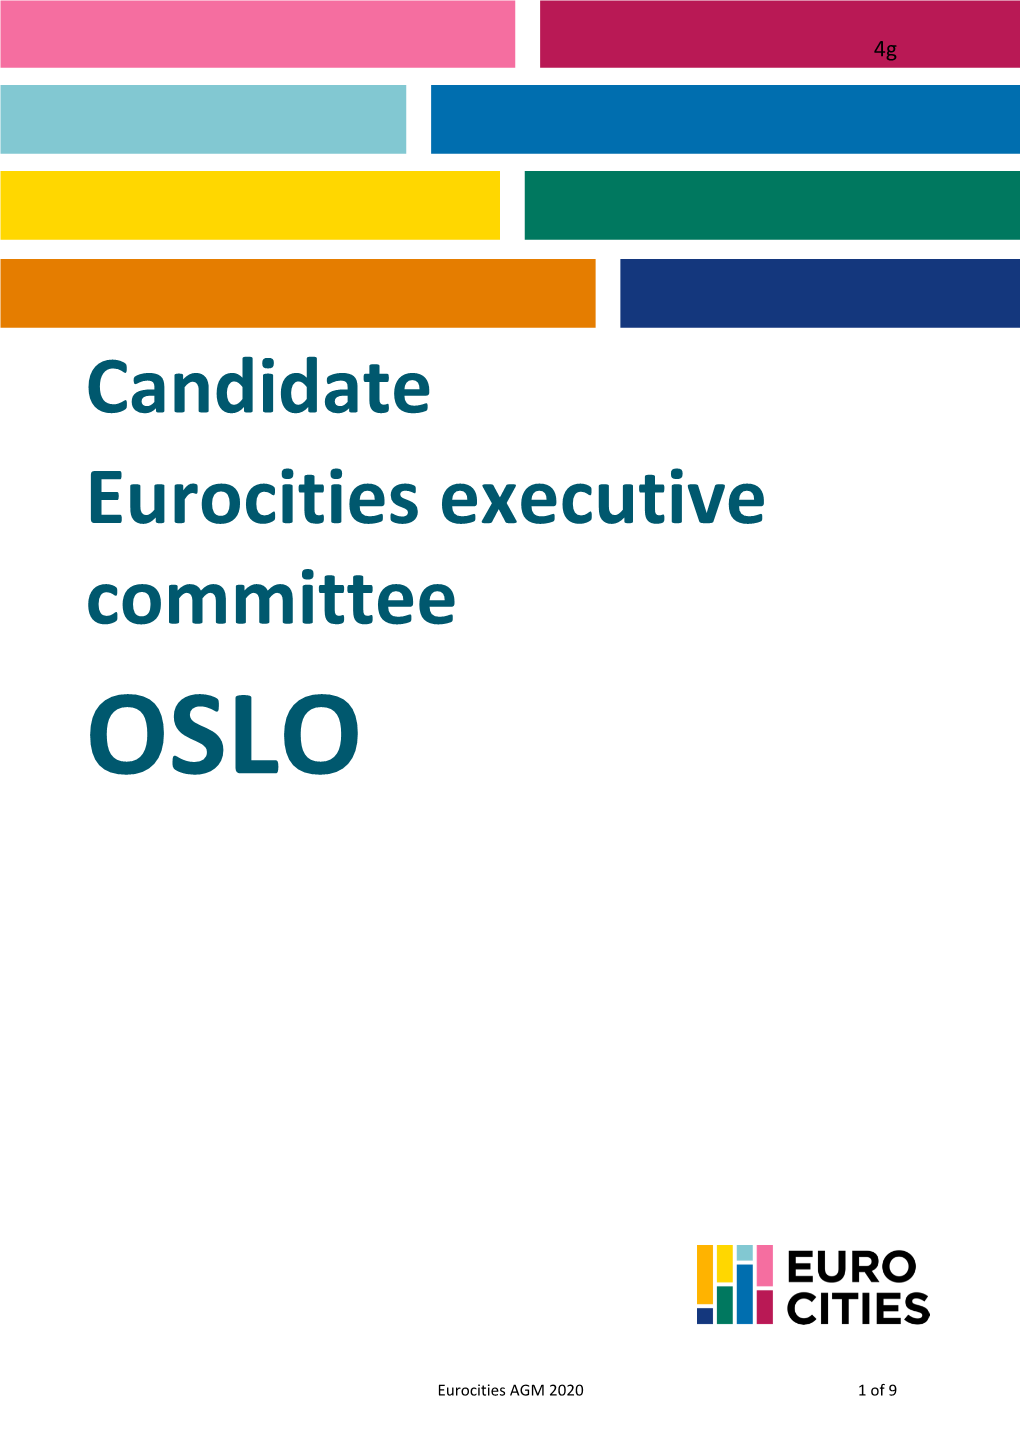 Candidate Eurocities Executive Committee